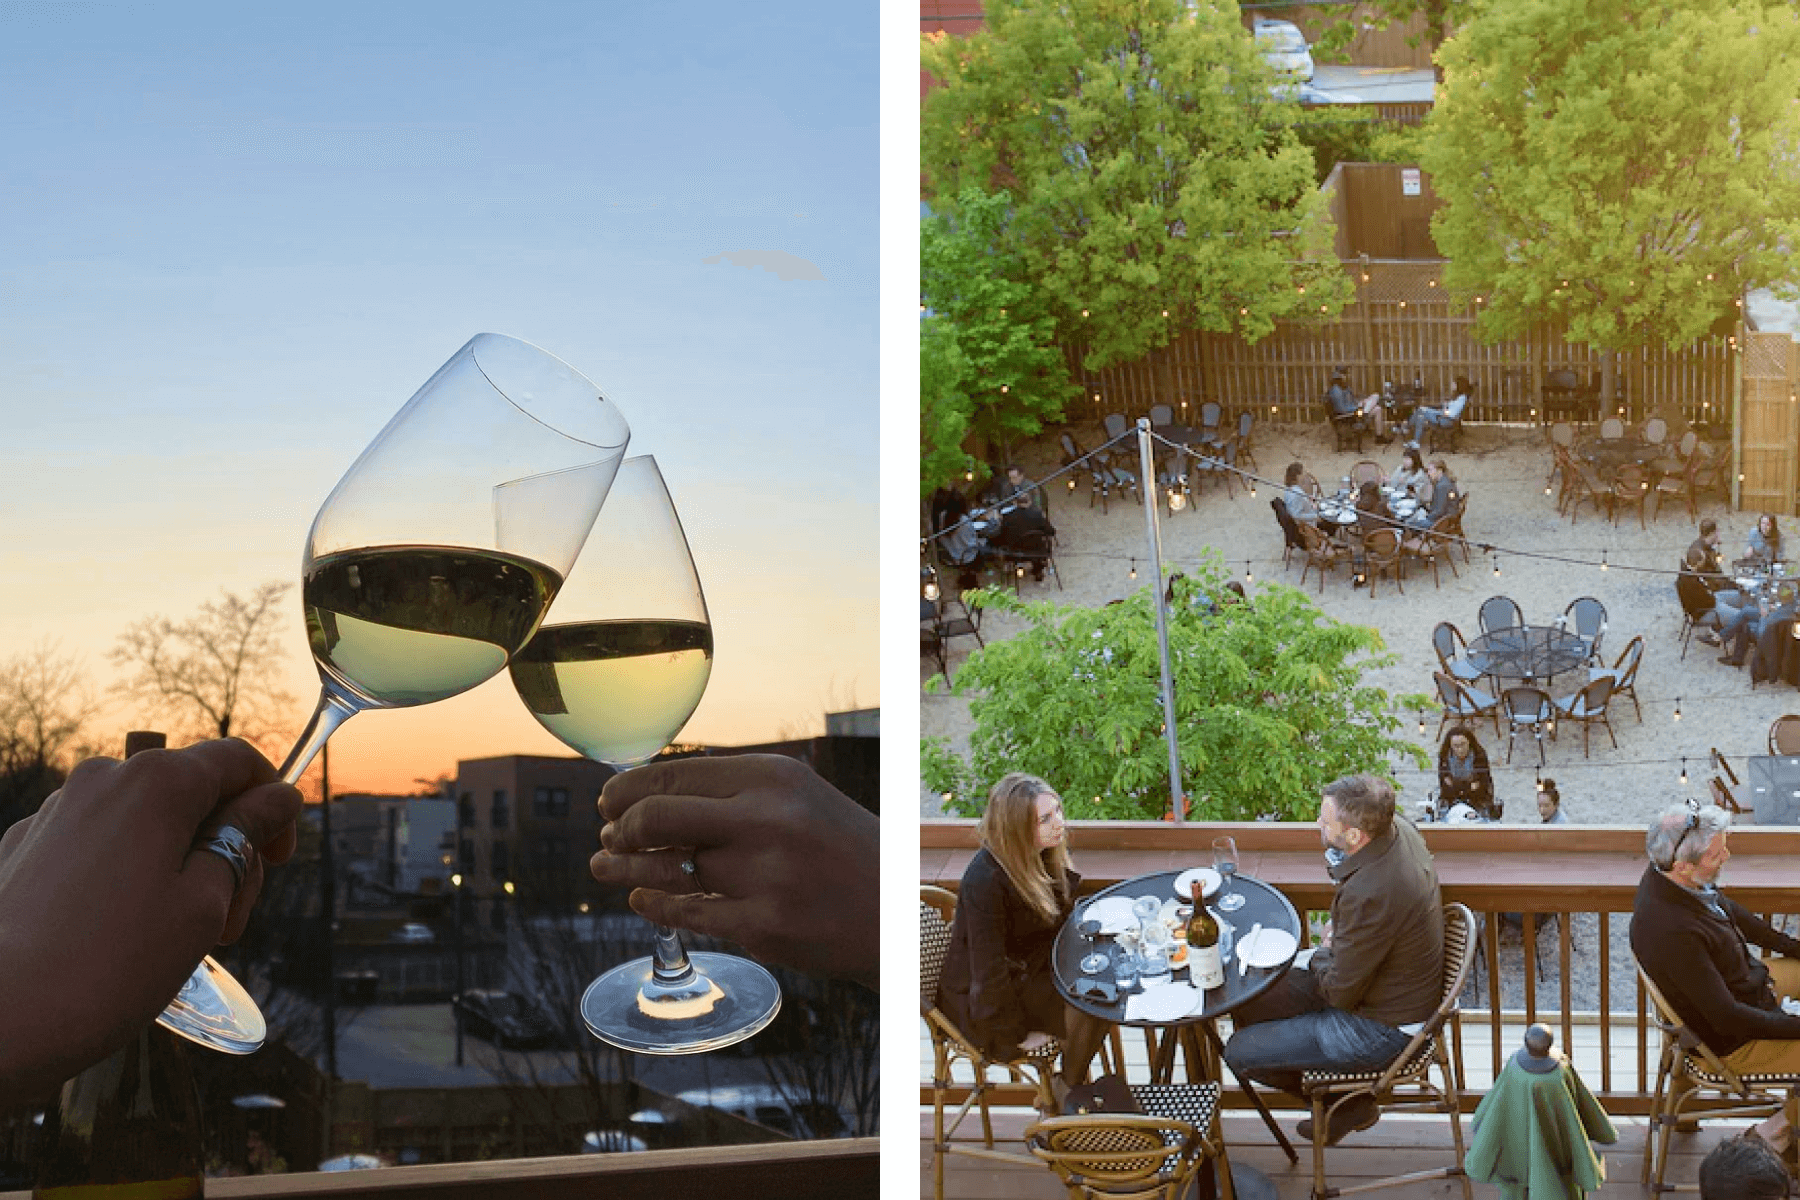 Left: Two people clinking wine glasses; Right: People enjoying the garden at St. Vincent Wine.